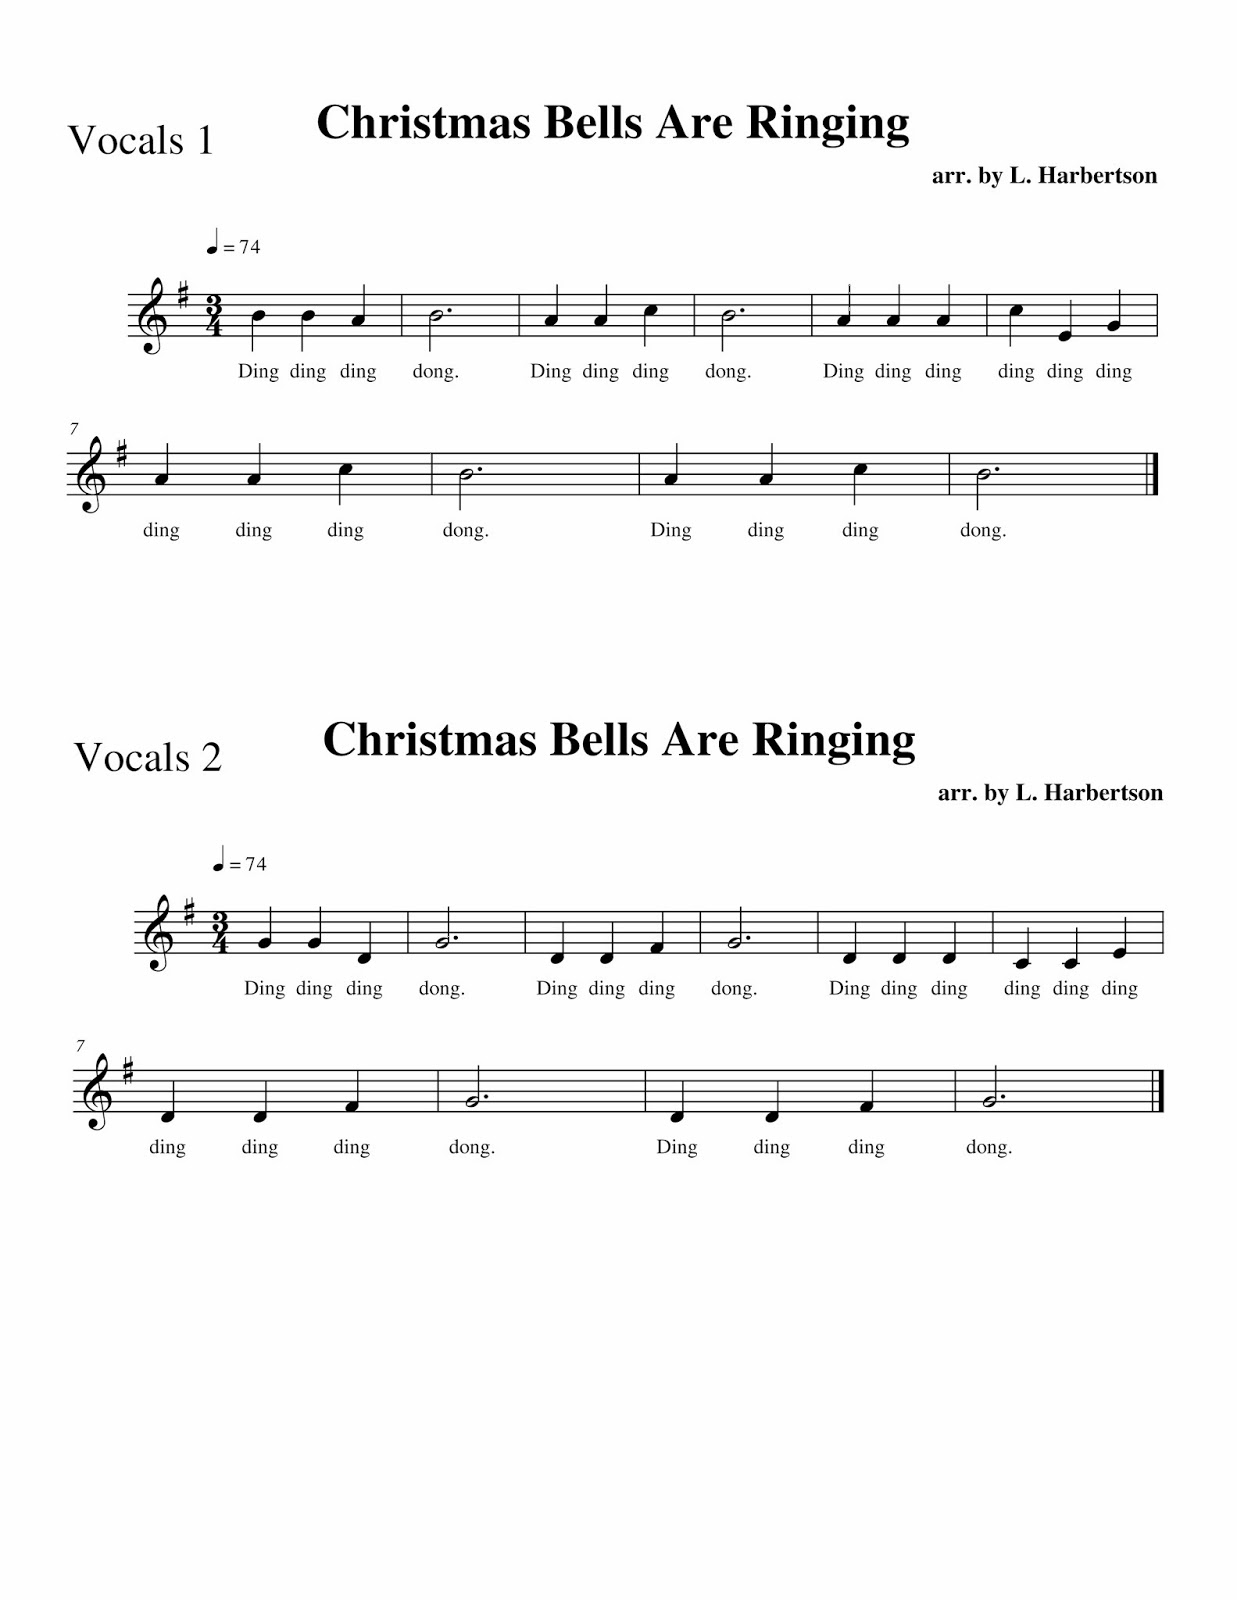 The Primary Music Leader: Christmas Bells are Ringing Day 3